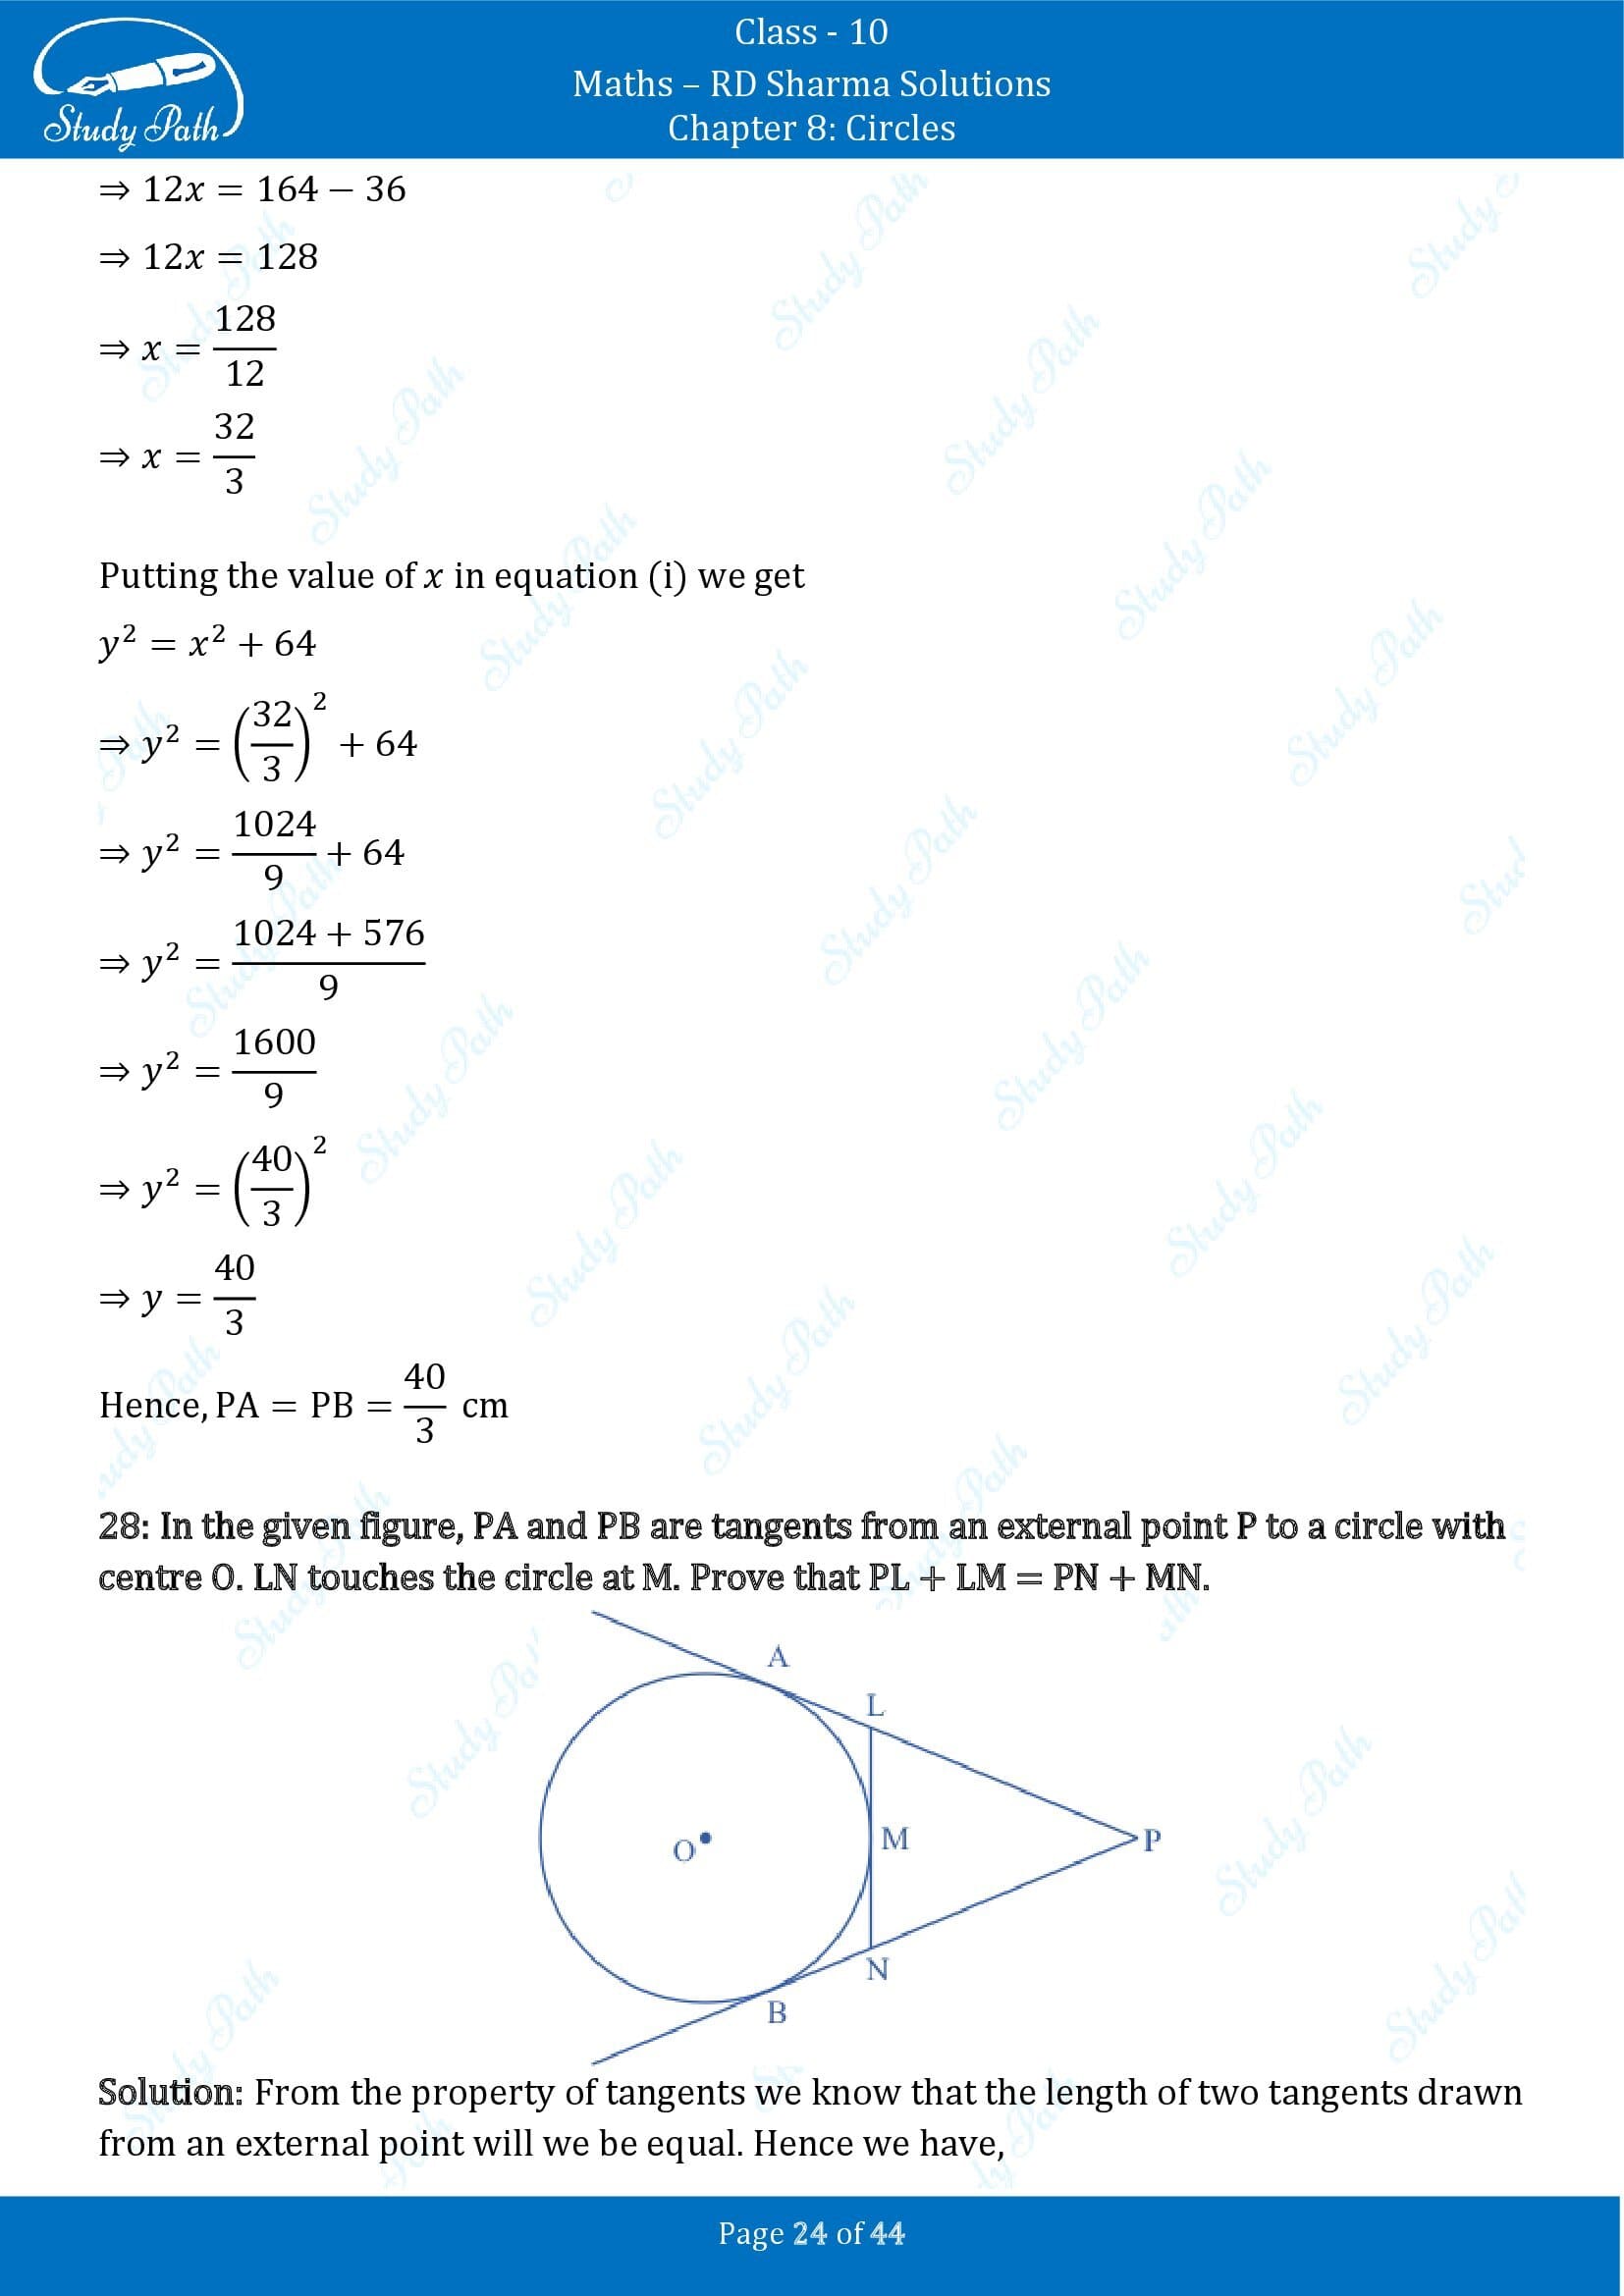 RD Sharma Solutions Class 10 Chapter 8 Circles Exercise 8.2 00024